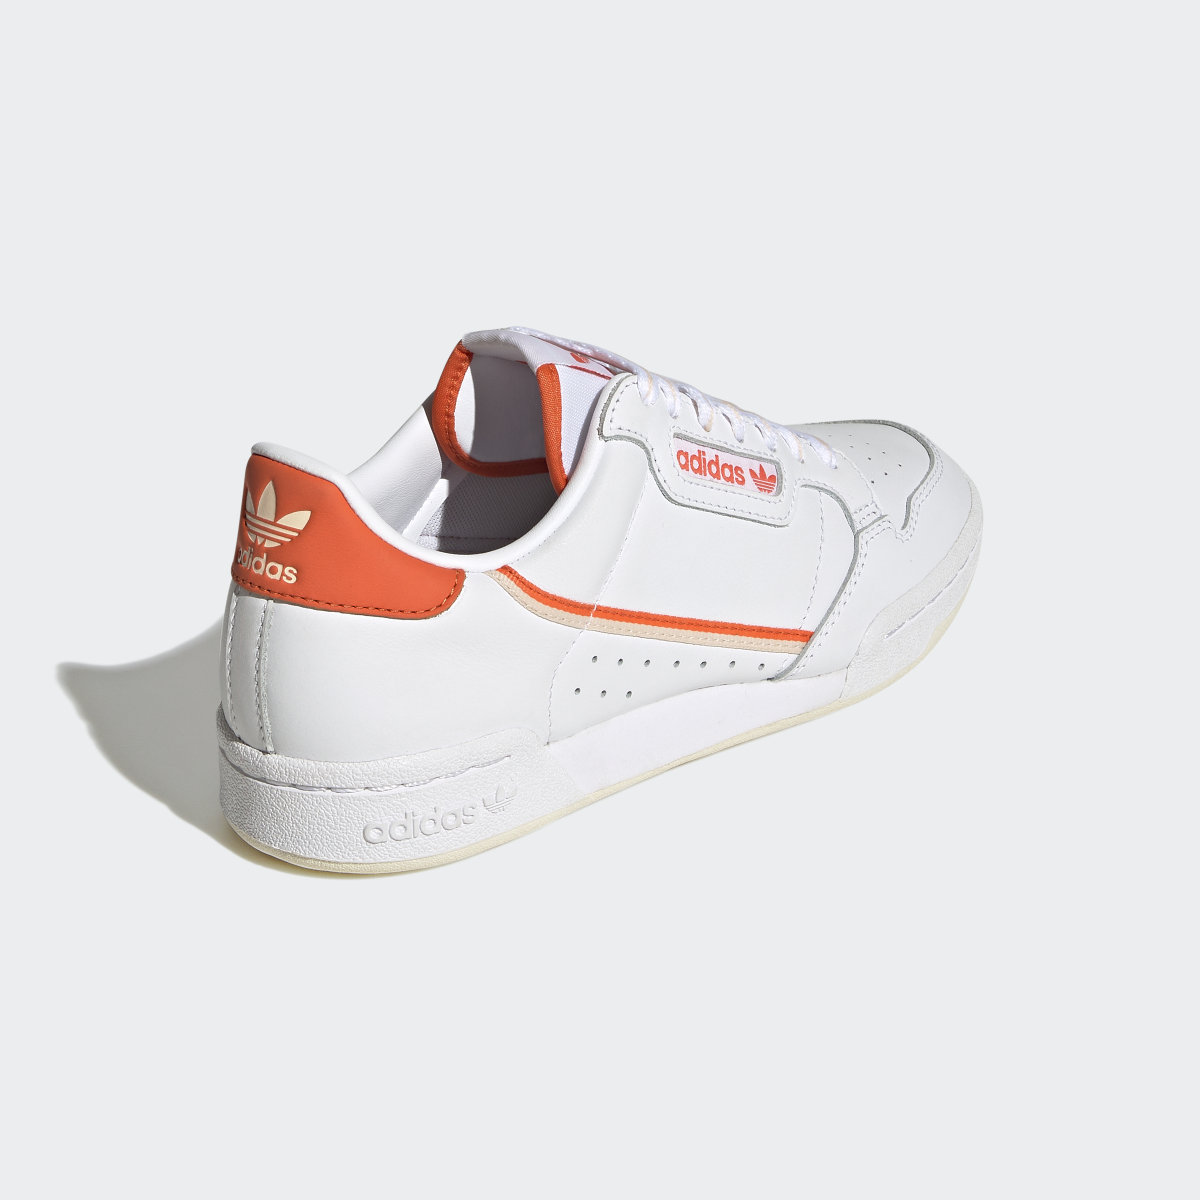 Adidas Continental 80 Shoes. 6